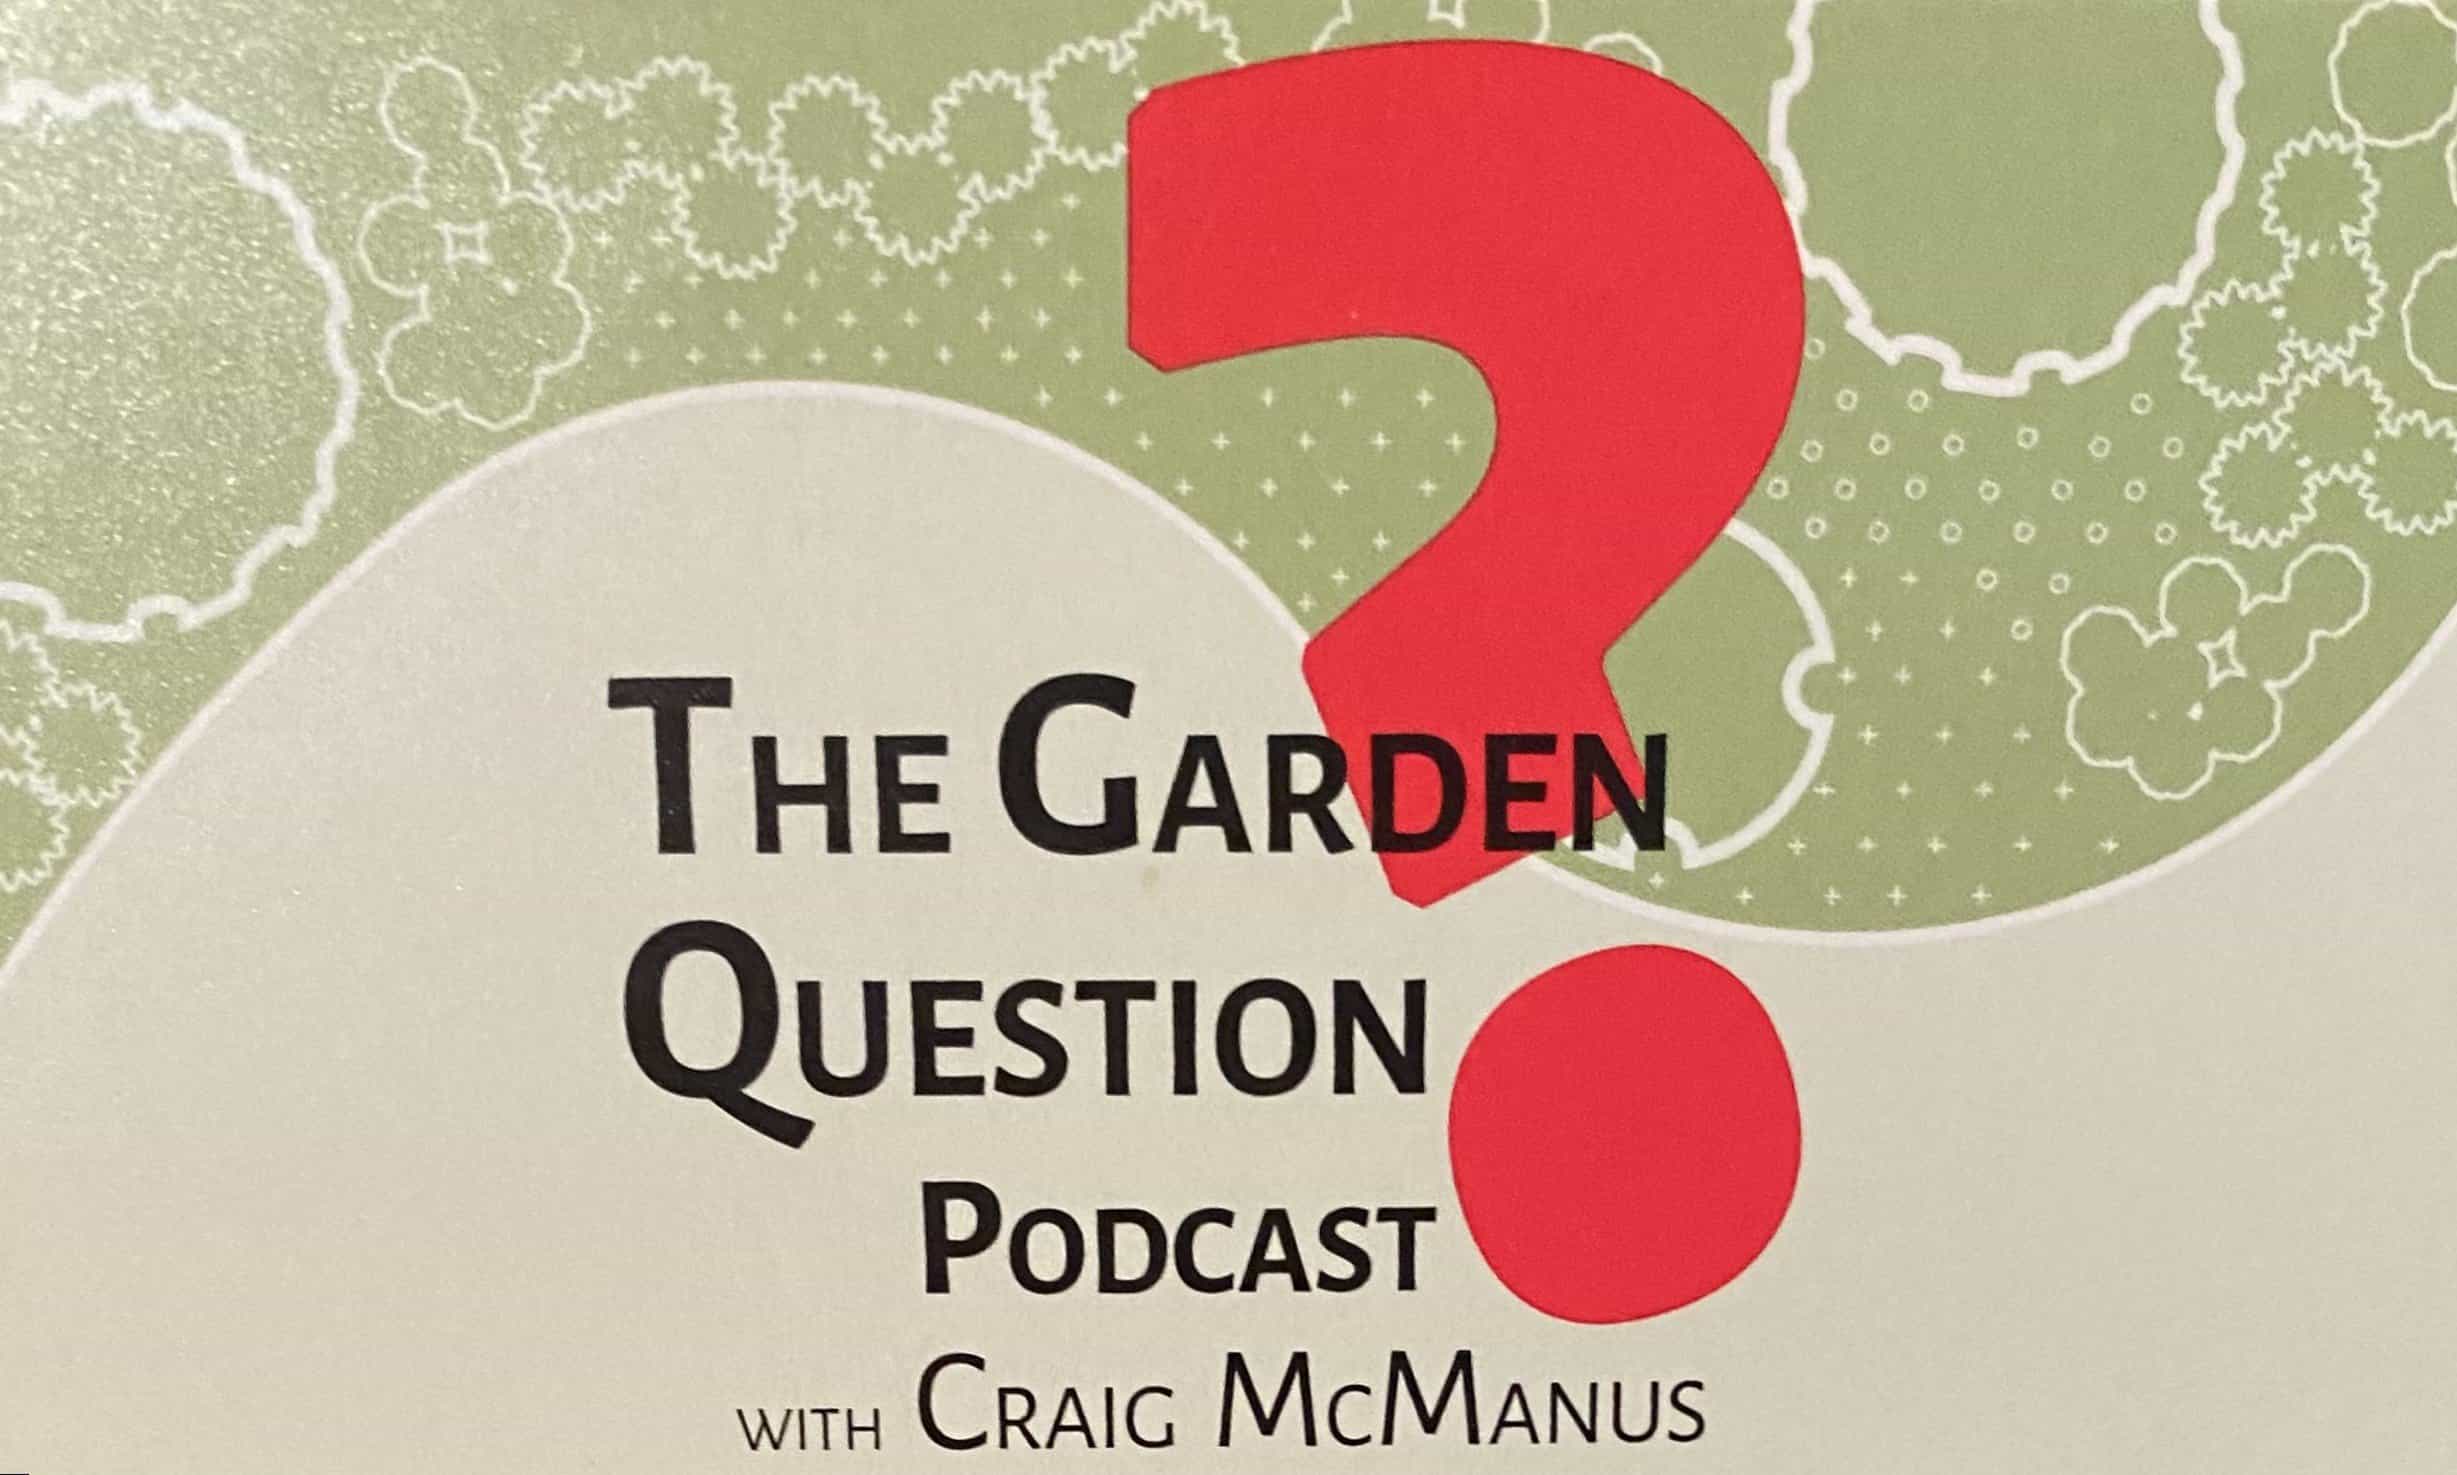 The Garden Question Podcast